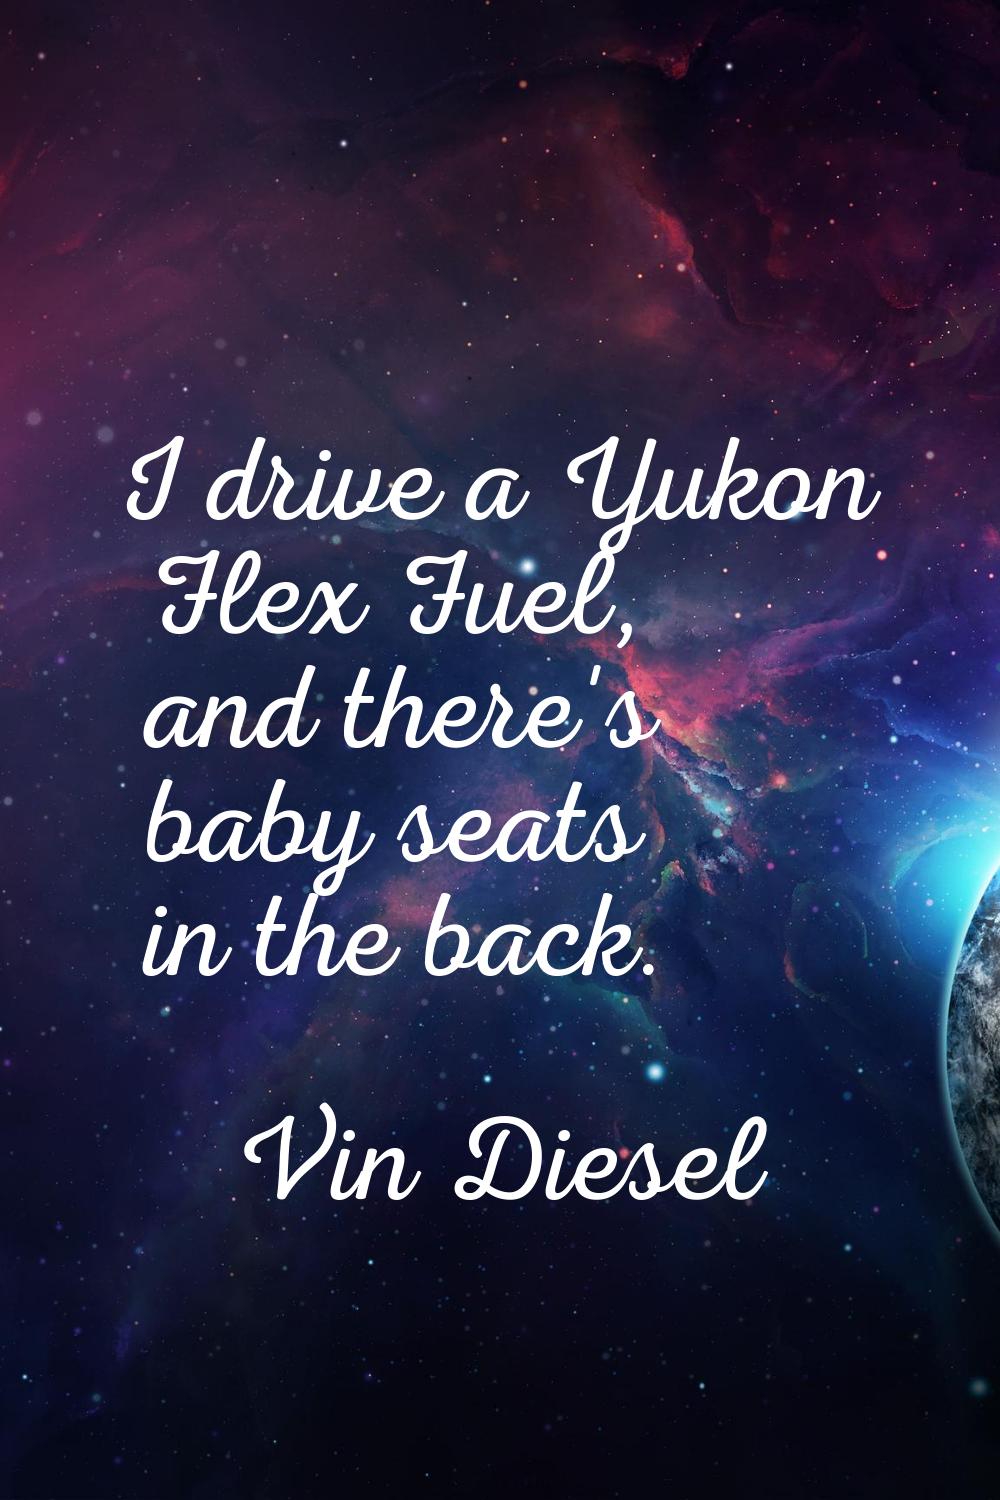 I drive a Yukon Flex Fuel, and there's baby seats in the back.